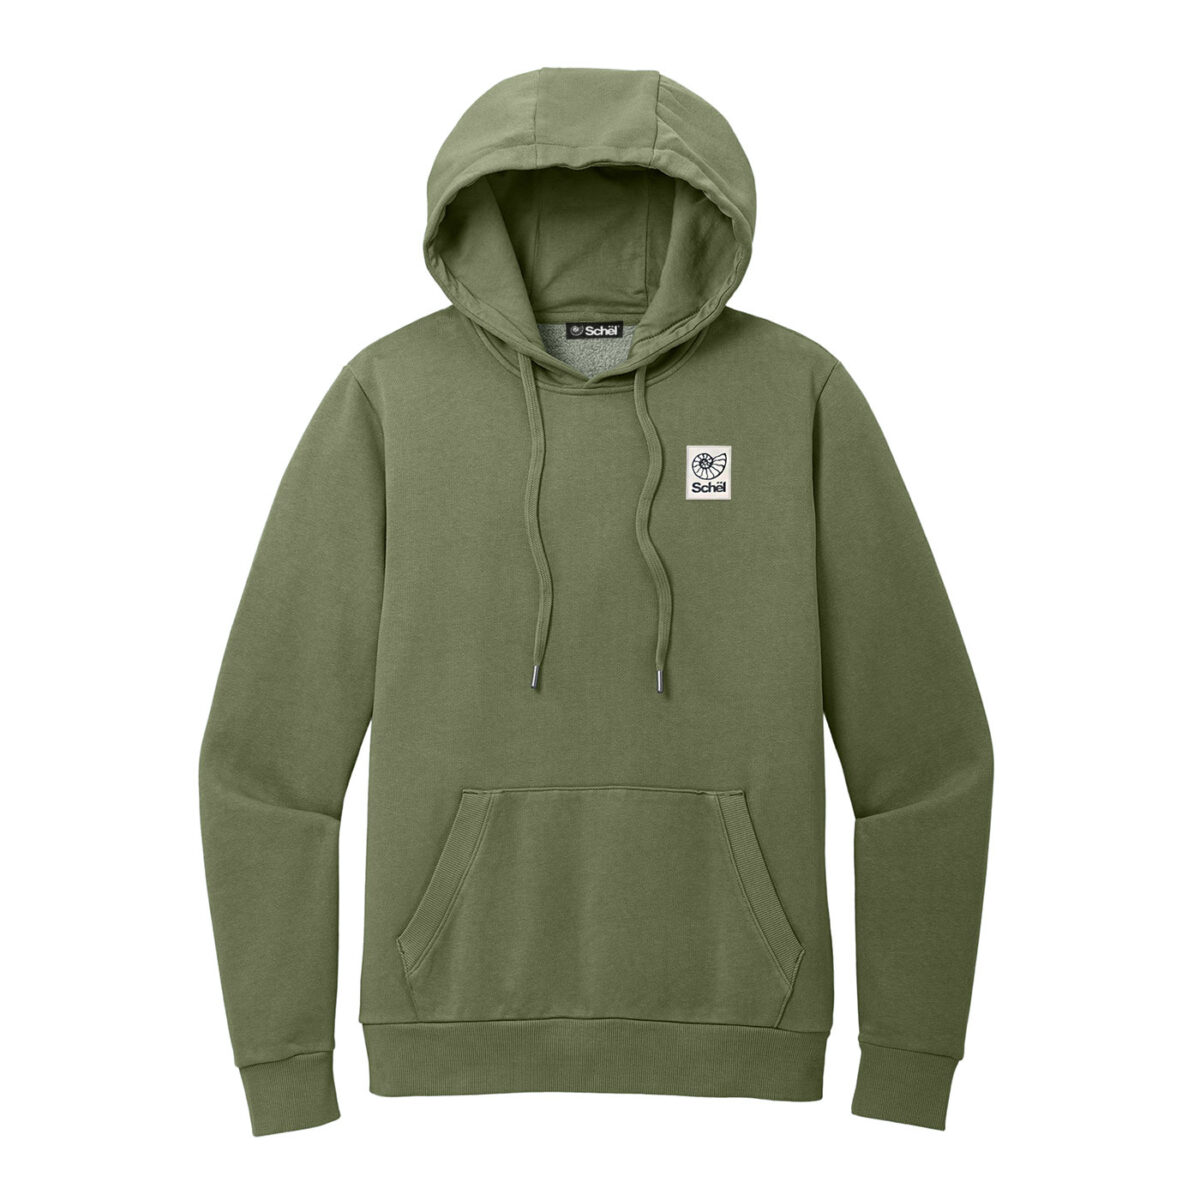 Base Camp Hoodie by Schël in Olive Green